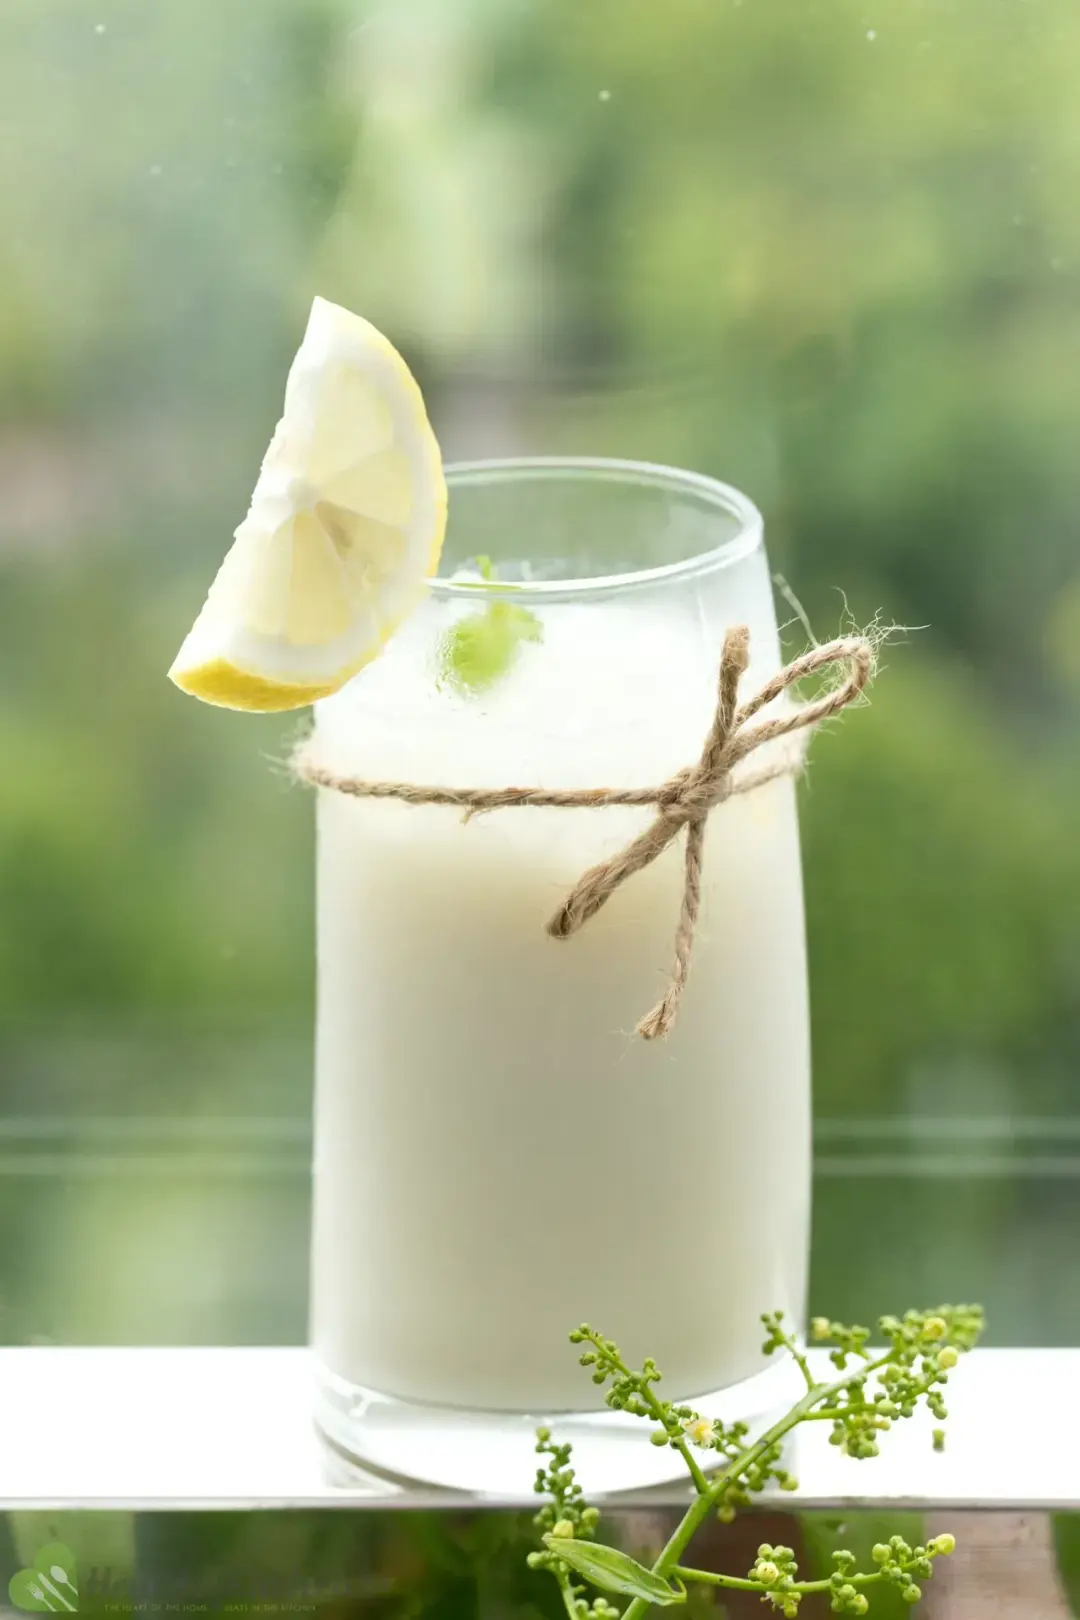 A glass of iced milk and lemon juice, garnished with lemons and mints and tied with a kitchen string